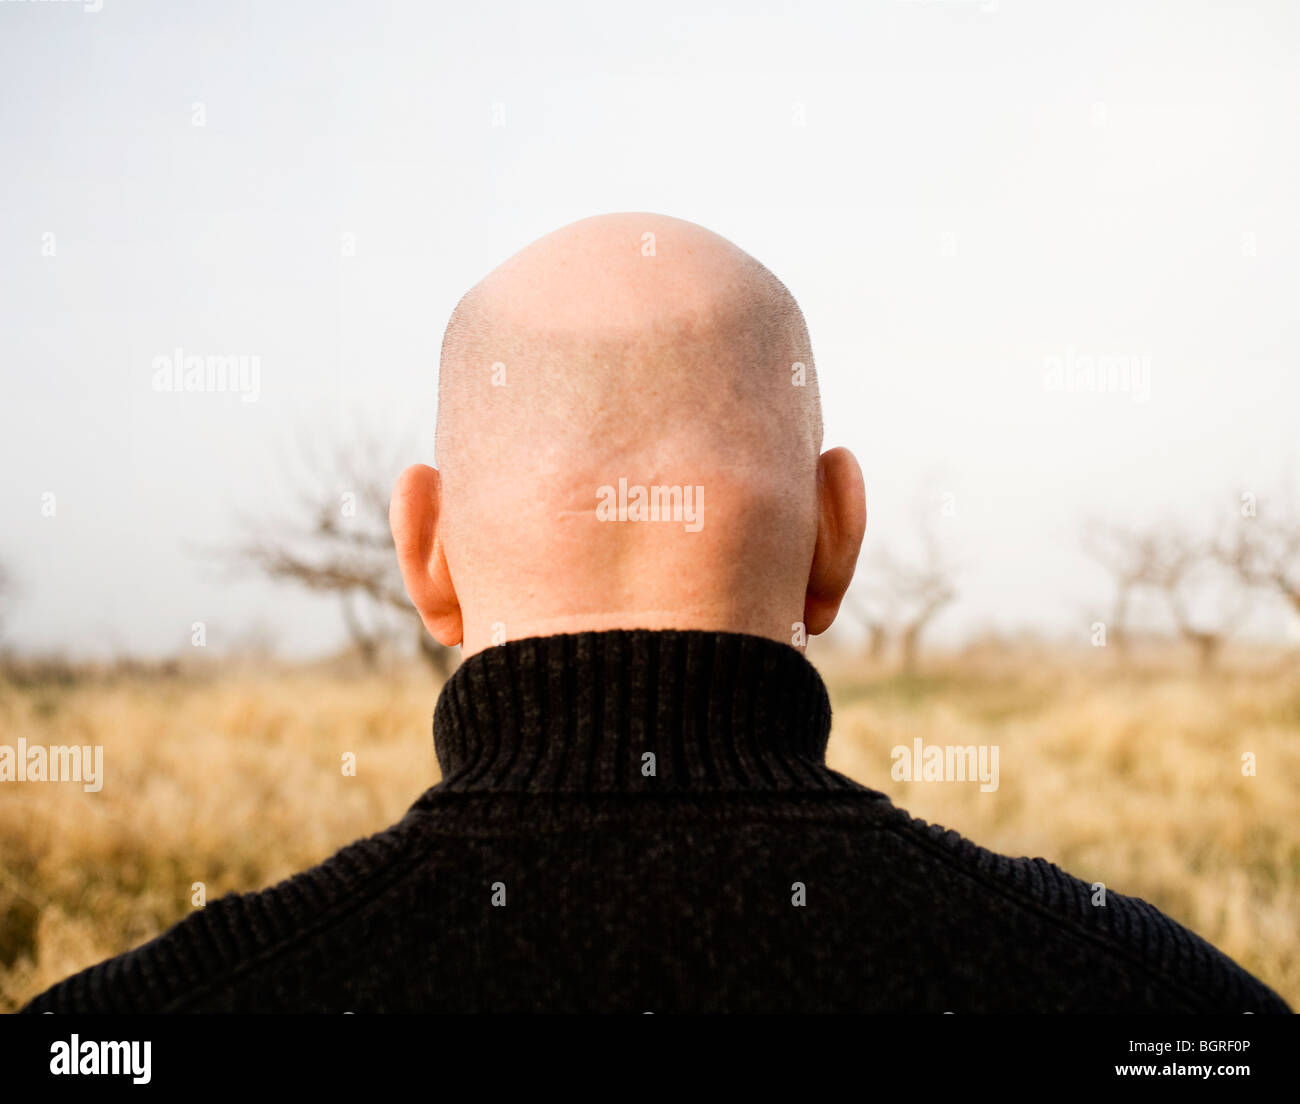 Close-up of a bald head, Sweden. Stock Photo